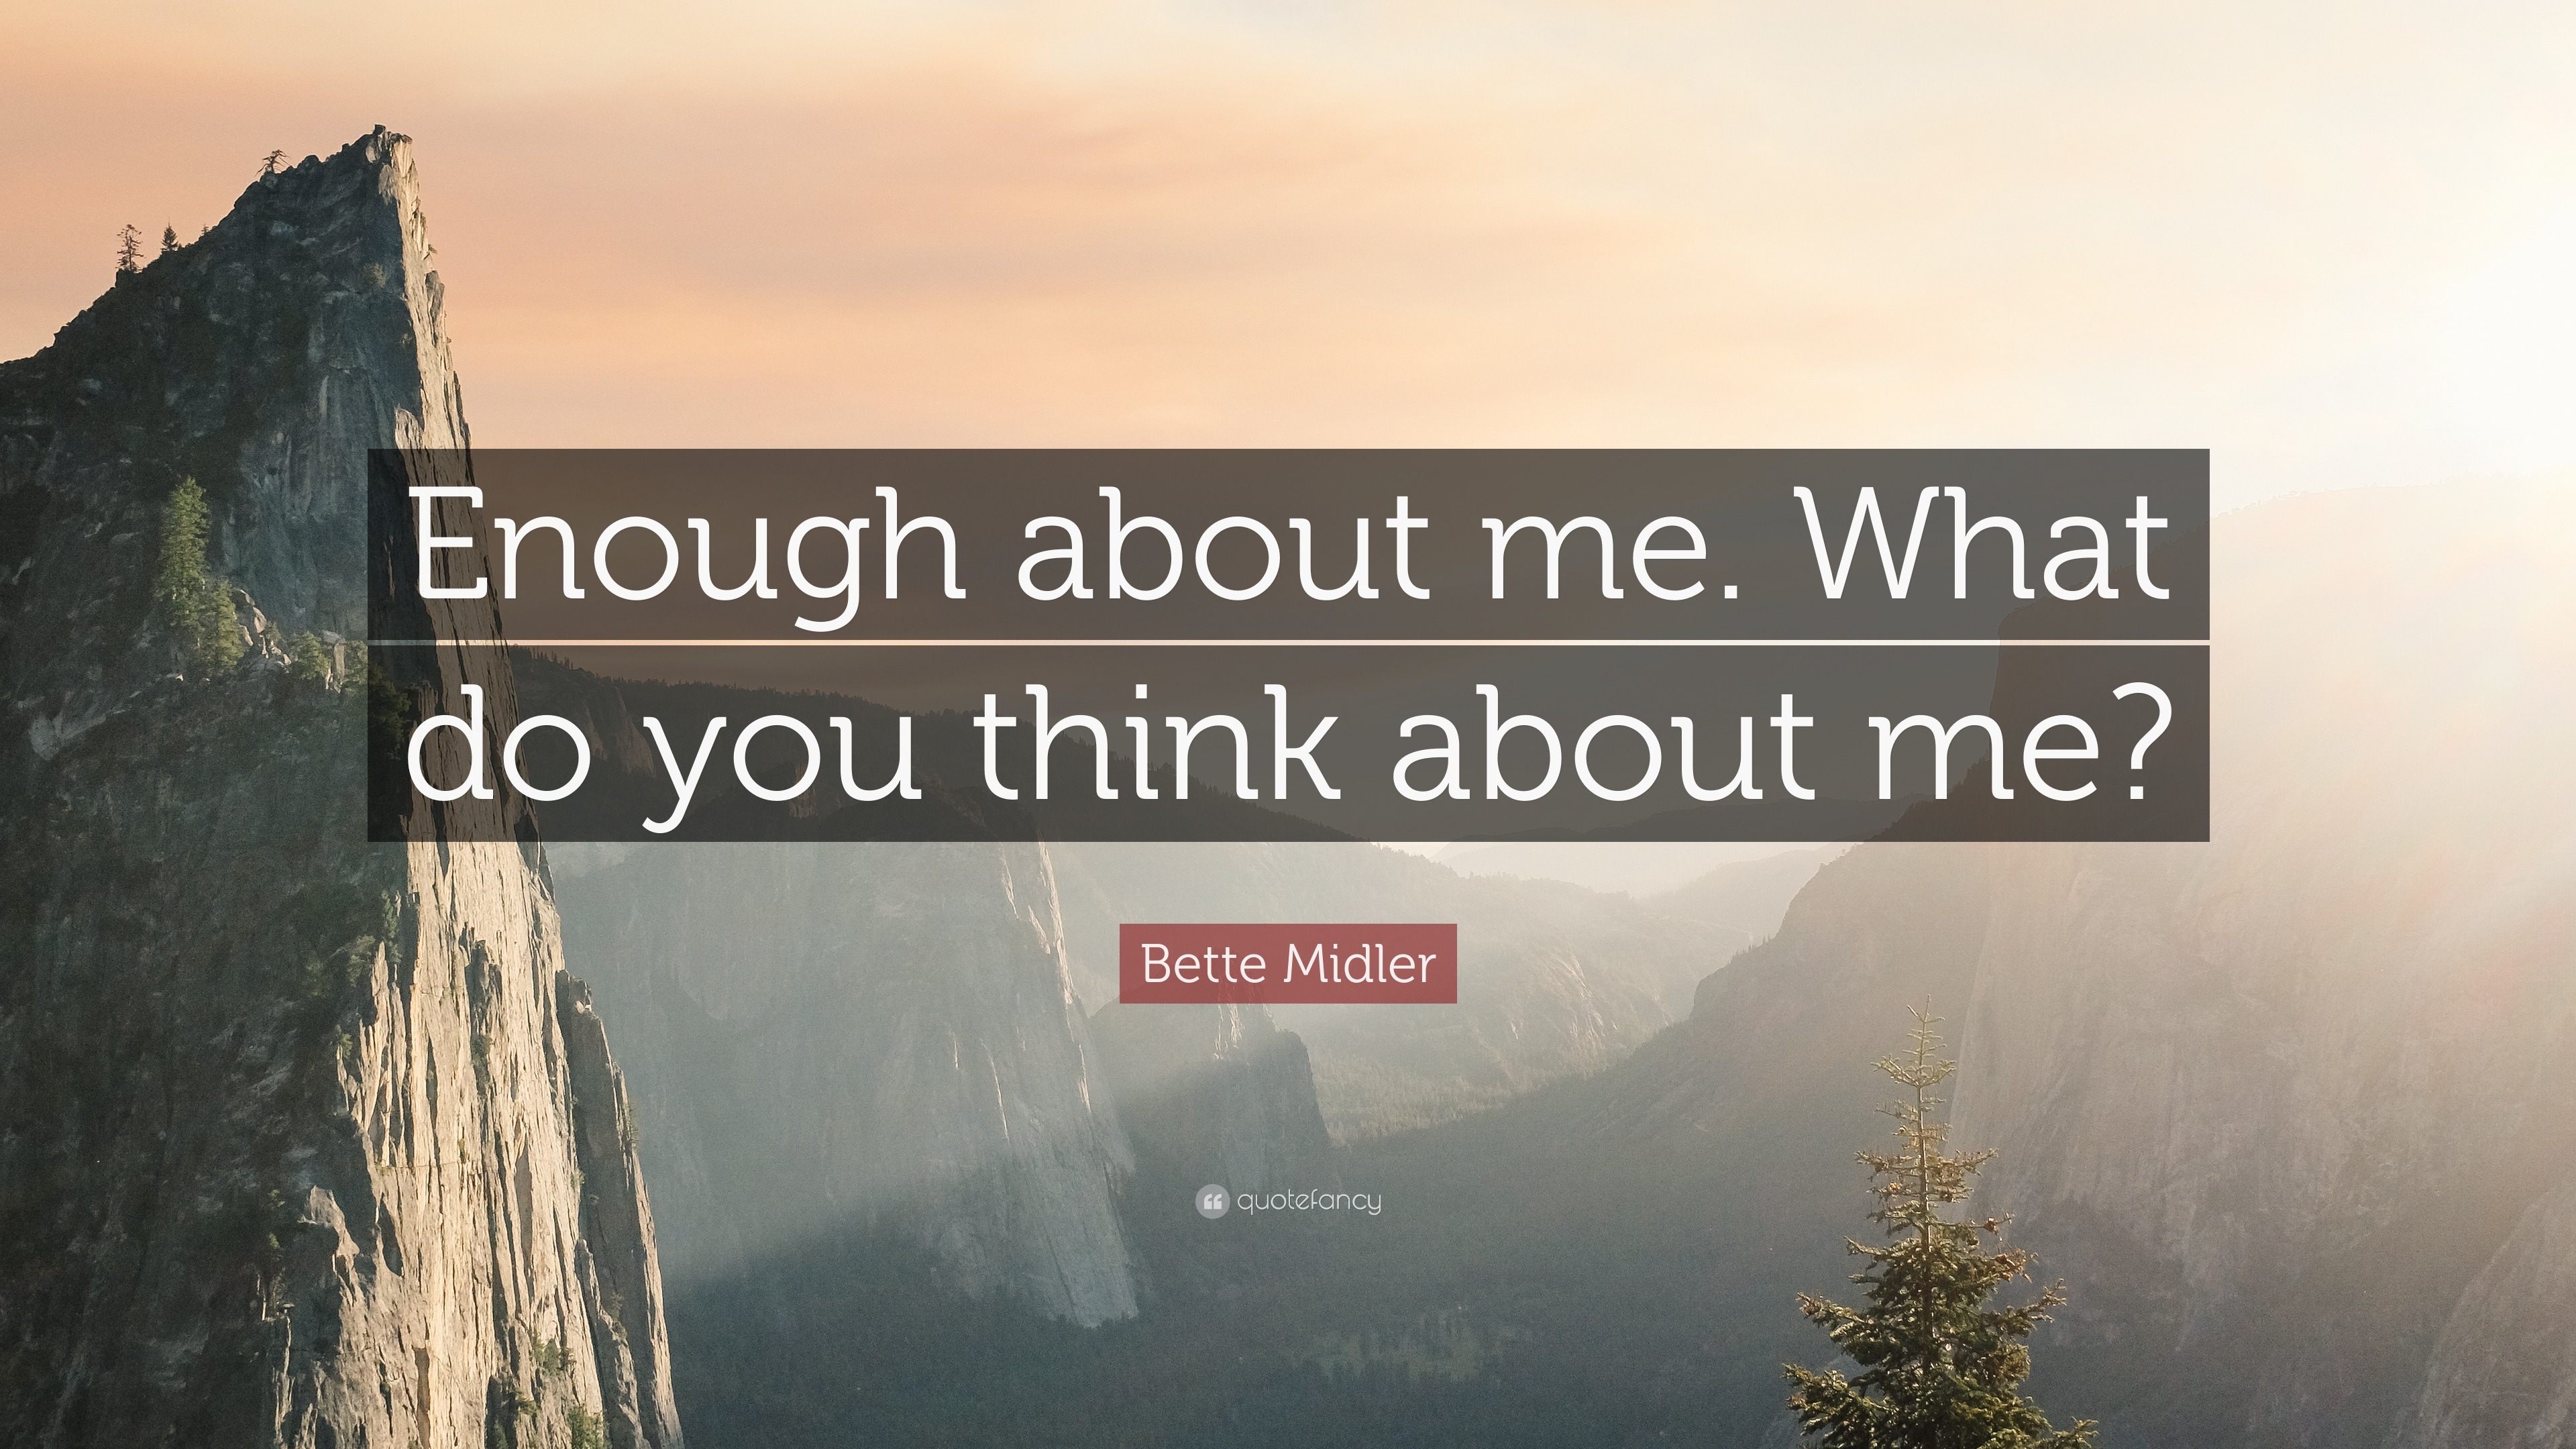 Bette Midler Quote Enough About Me What Do You Think About Me